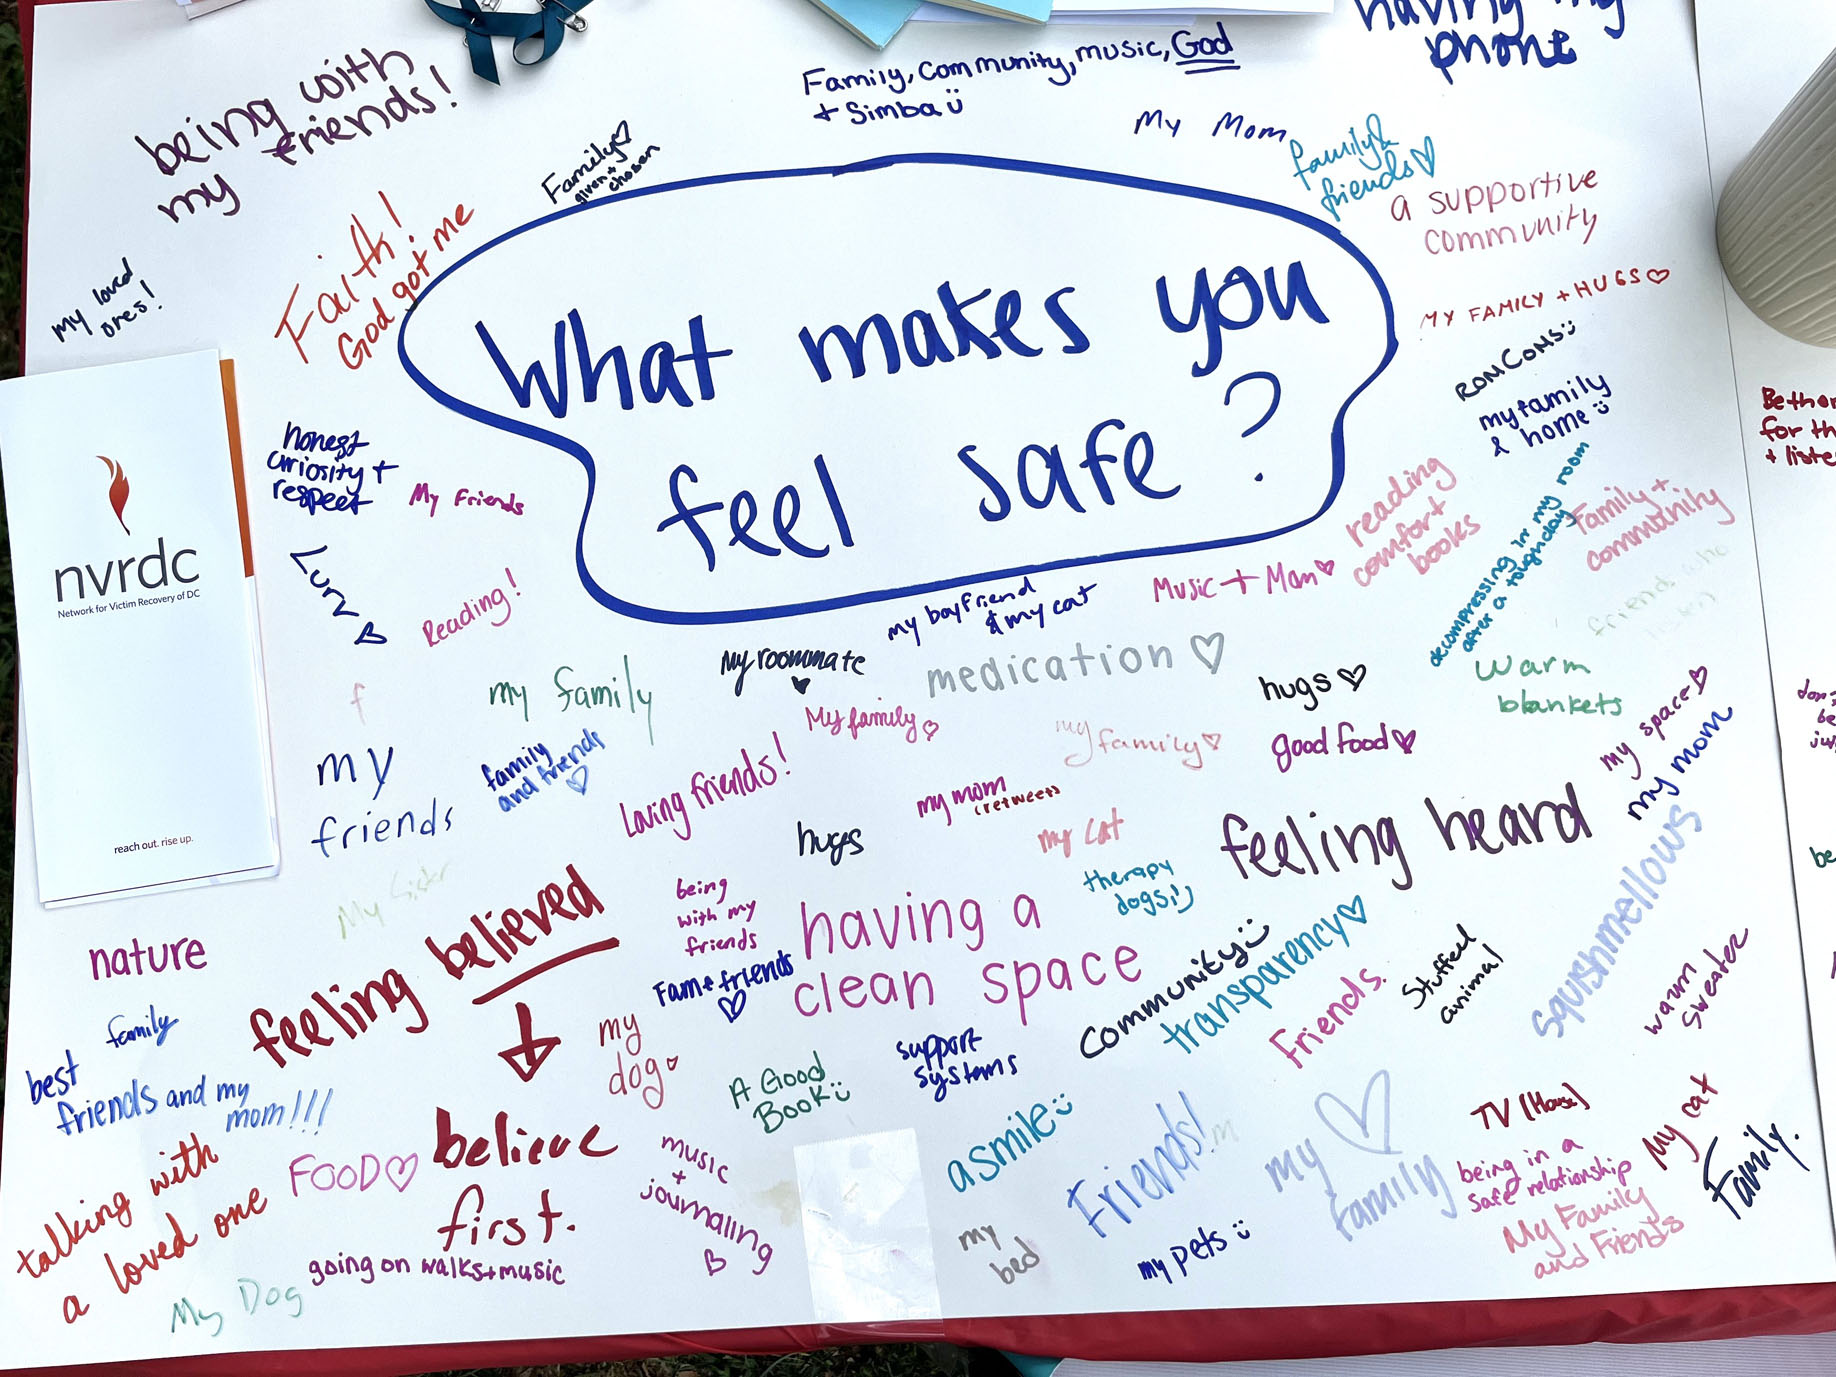 A photo of a piece of paper with "What make you feel safe?" written in the center. Many answers surround it, like "feeling heard" or "faith" or "friends."